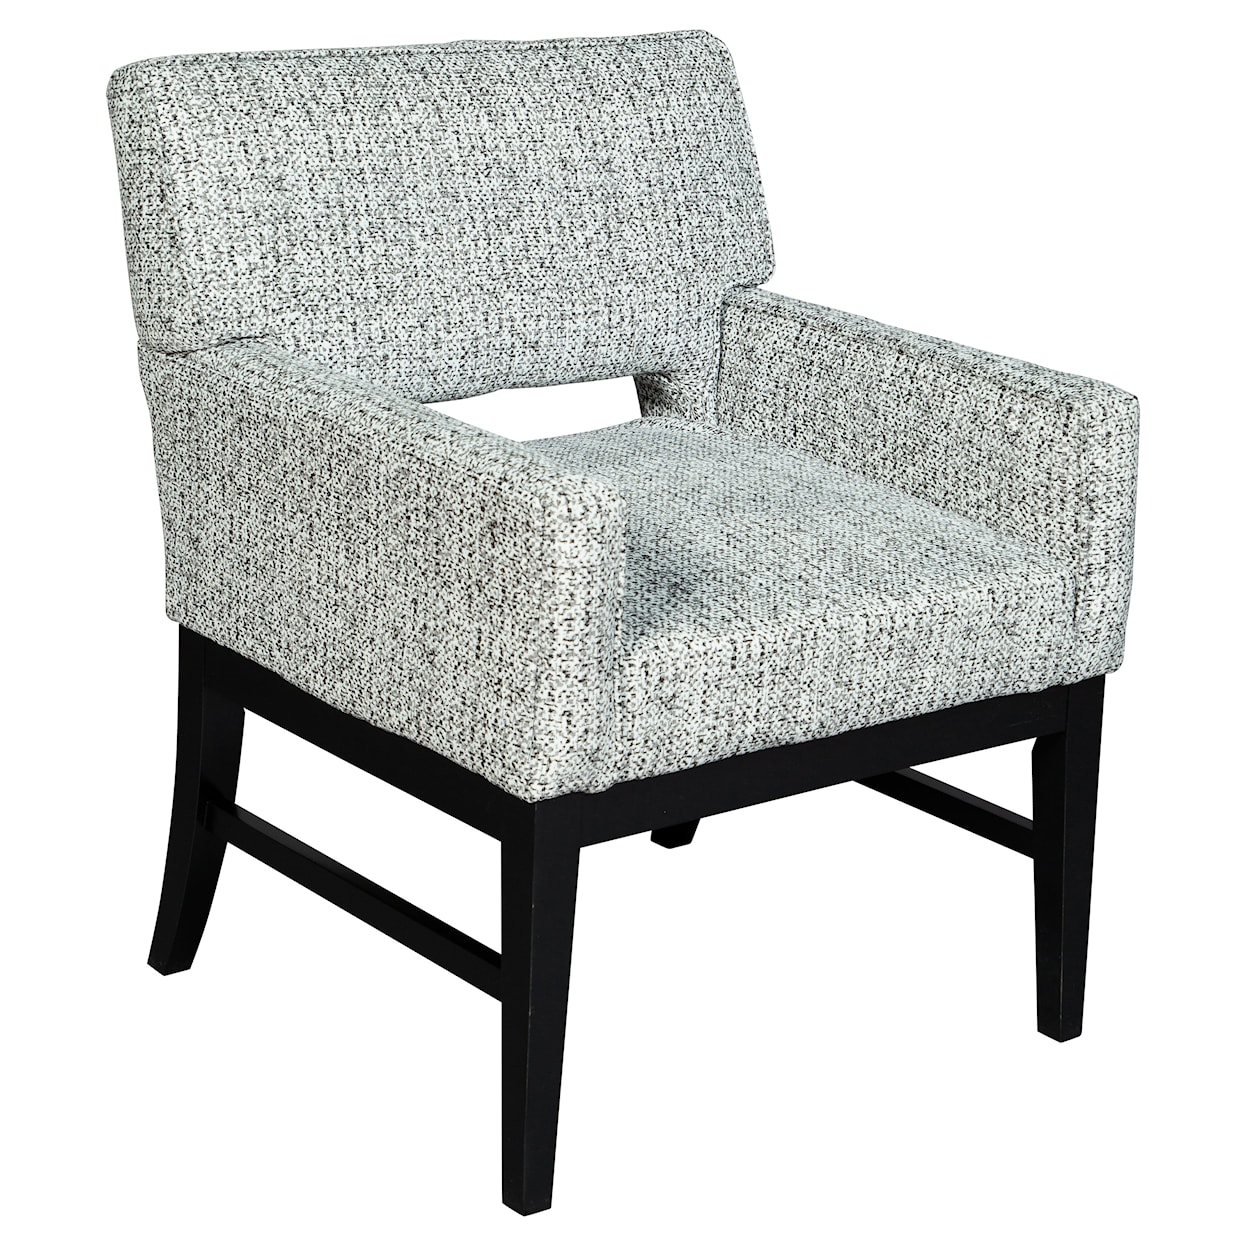 Hekman Upholstery Kami Accent Chair